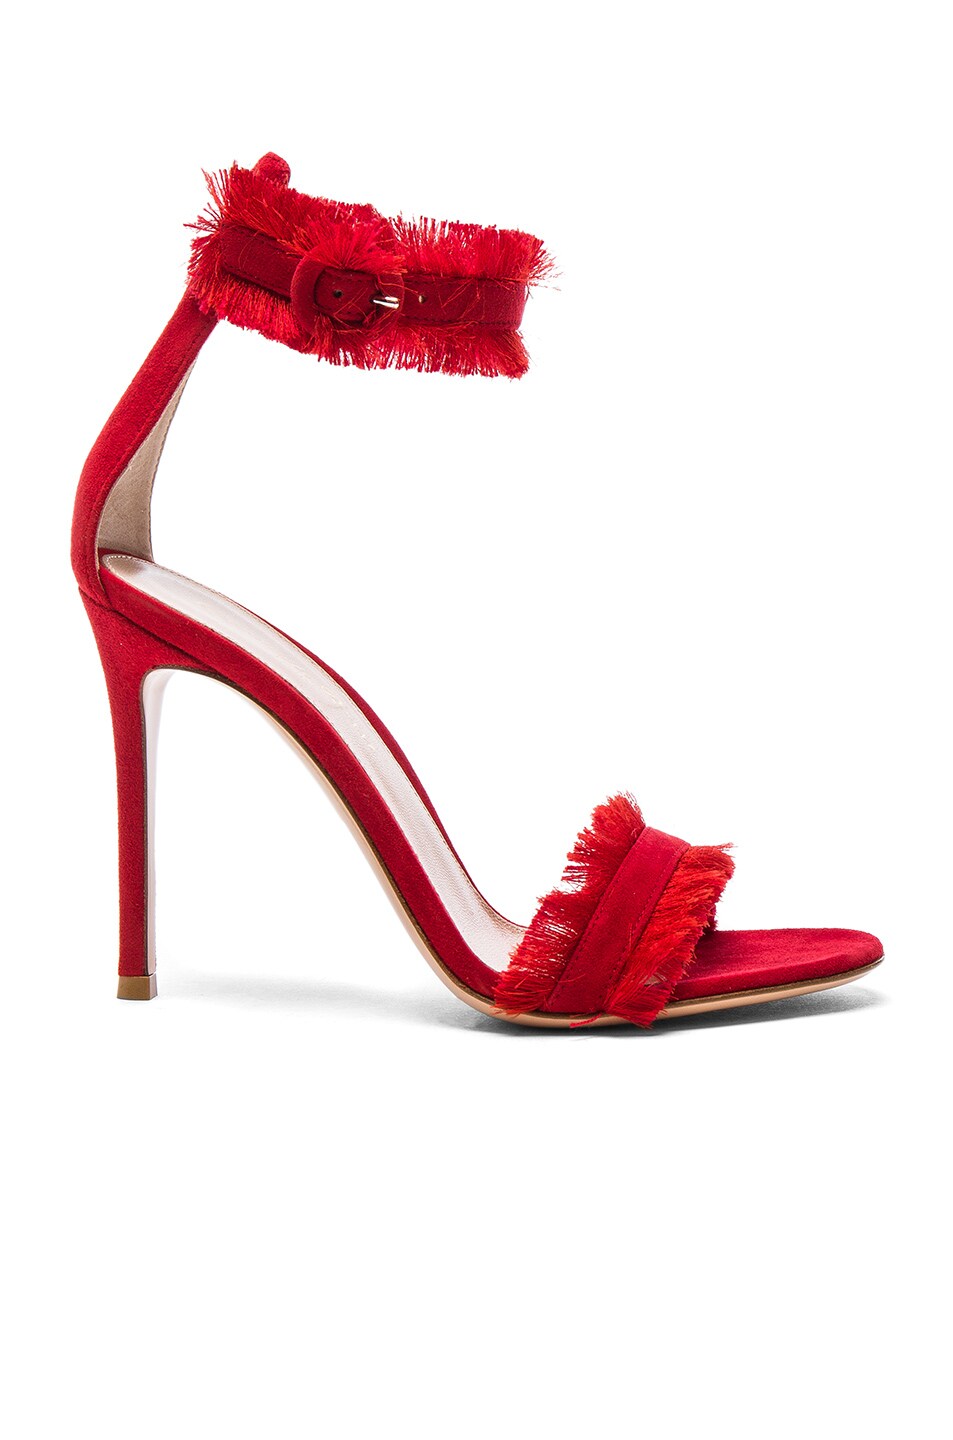 Image 1 of Gianvito Rossi Suede & Satin Heels in Tabasco Red